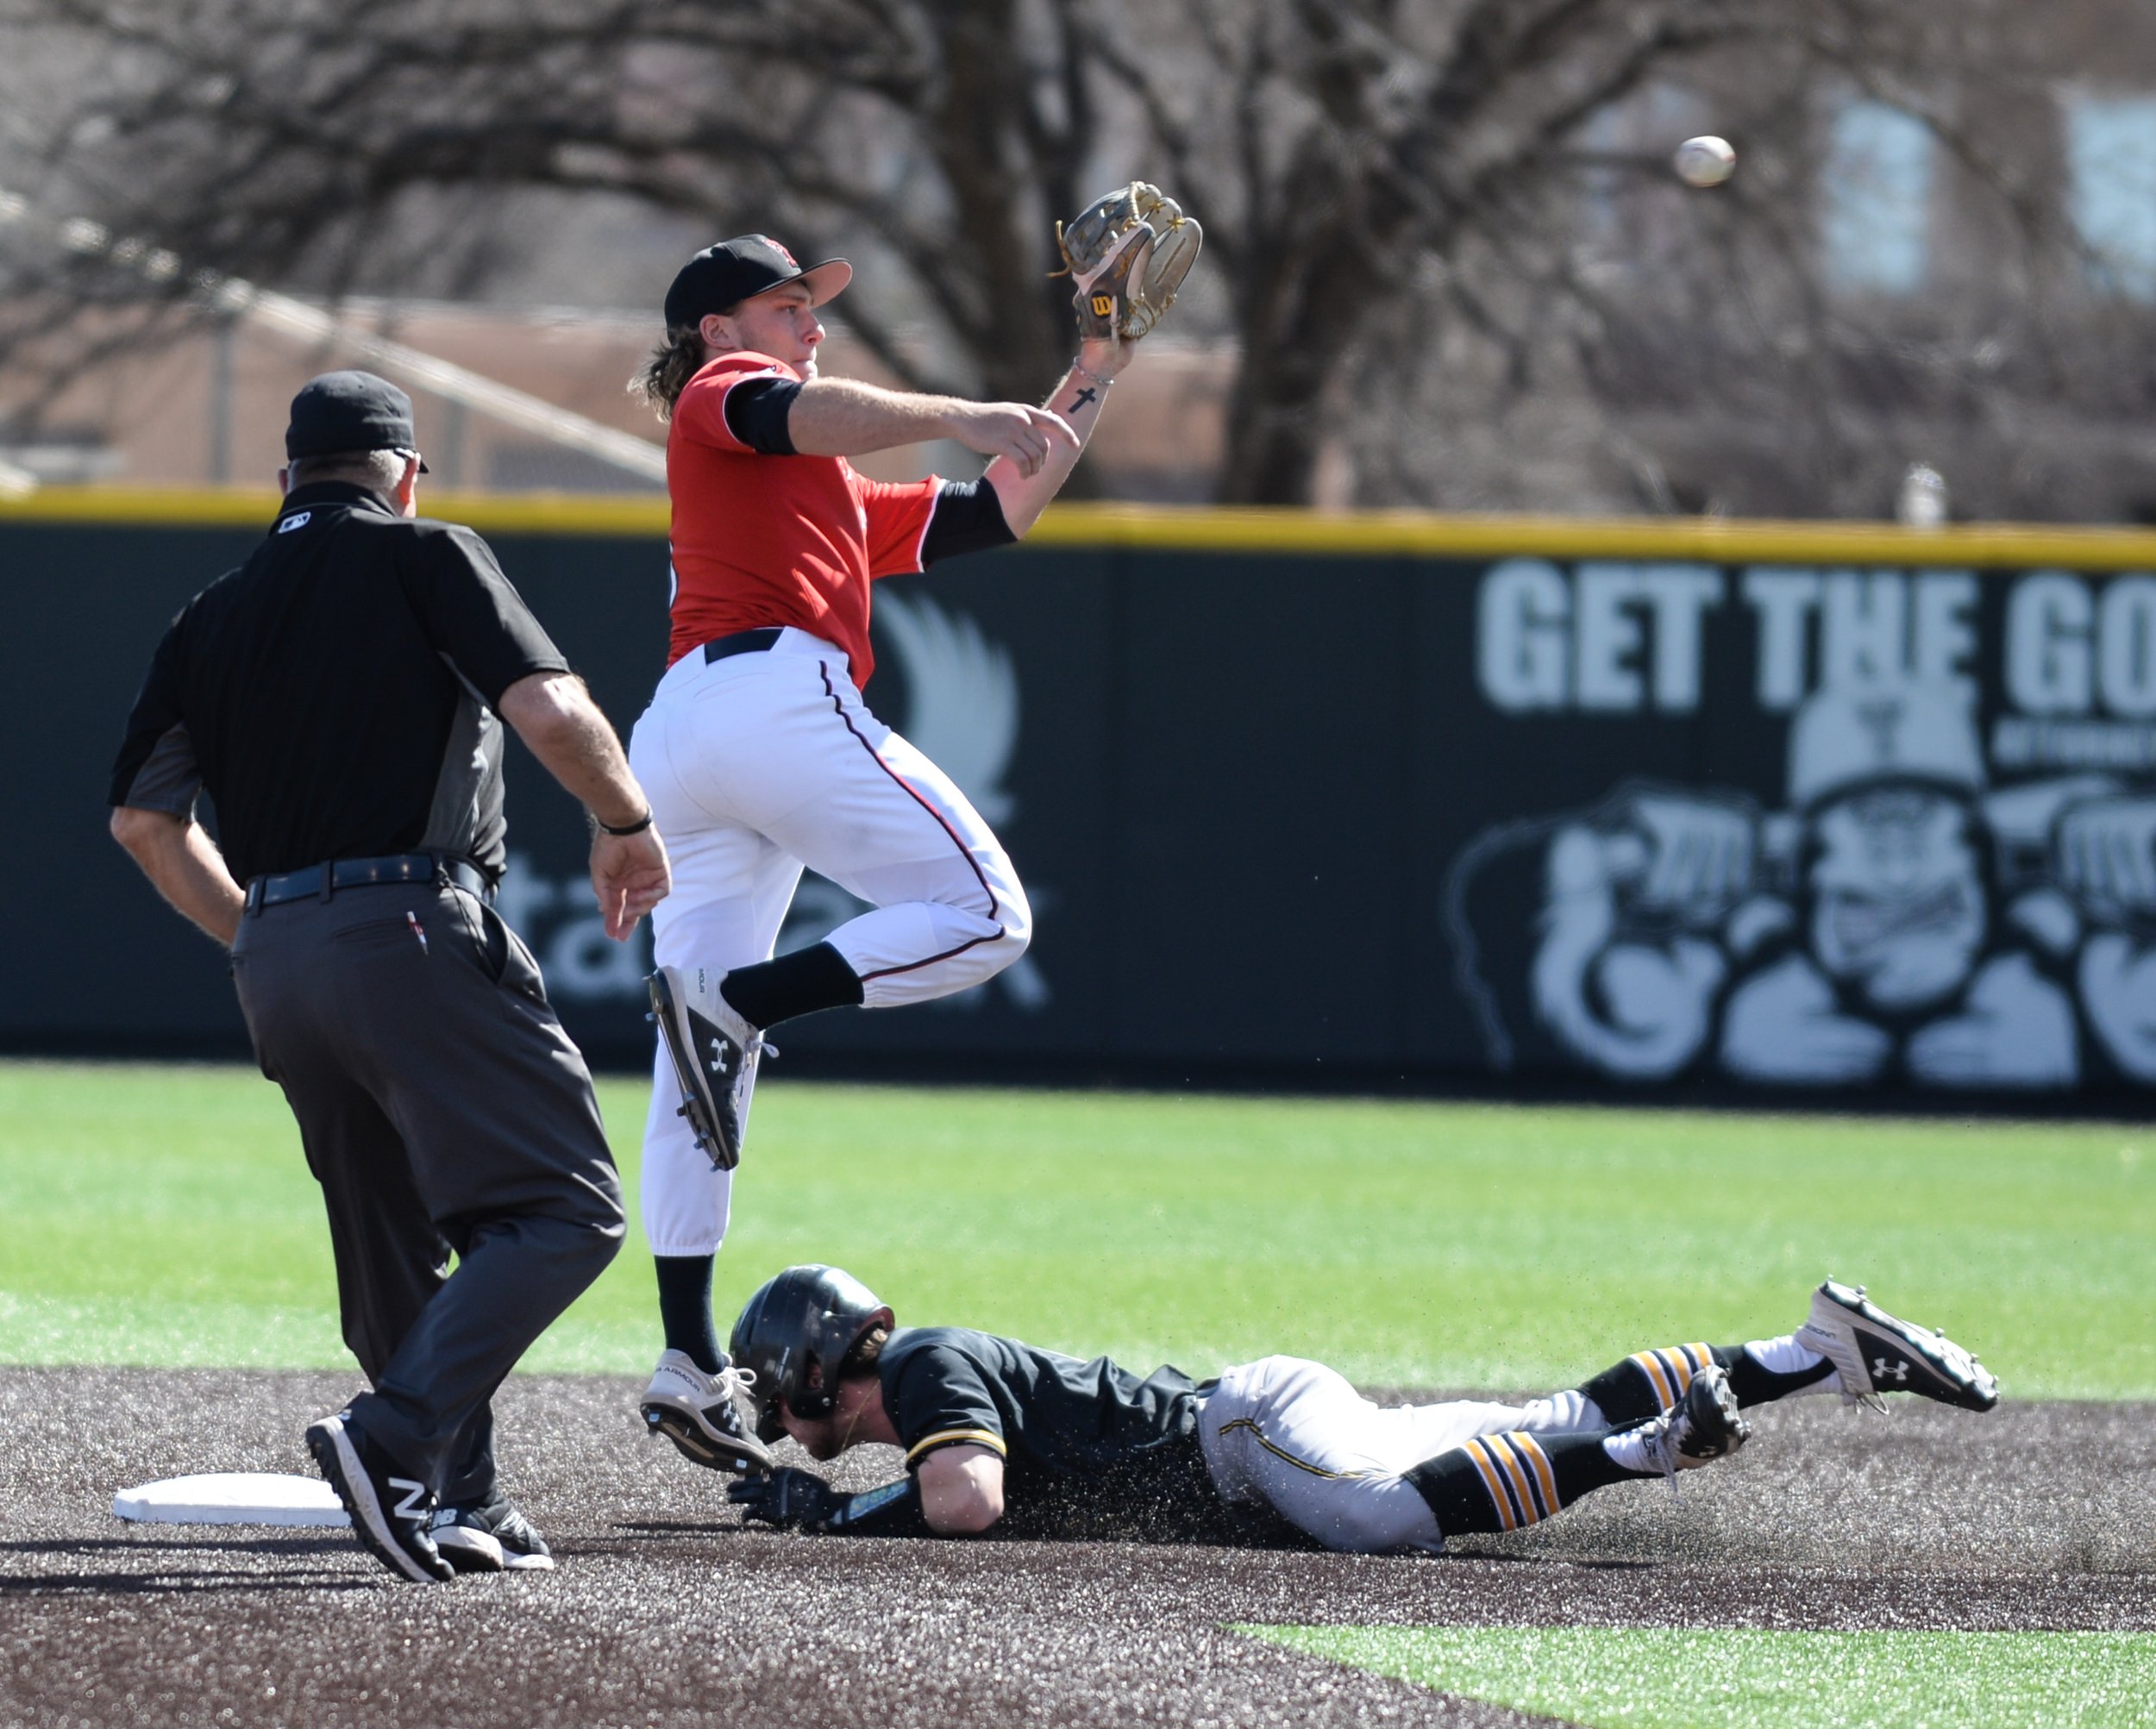  Wichita State's Jack Sigrist (6) safely slides into second base before Texas Tech's Dru Baker (4) can catch the ball during the second series game of three Saturday, March 9, 2019 at Dan Law Field in Rip Griffin Park. [Abbie Burnett/A-J Media] 